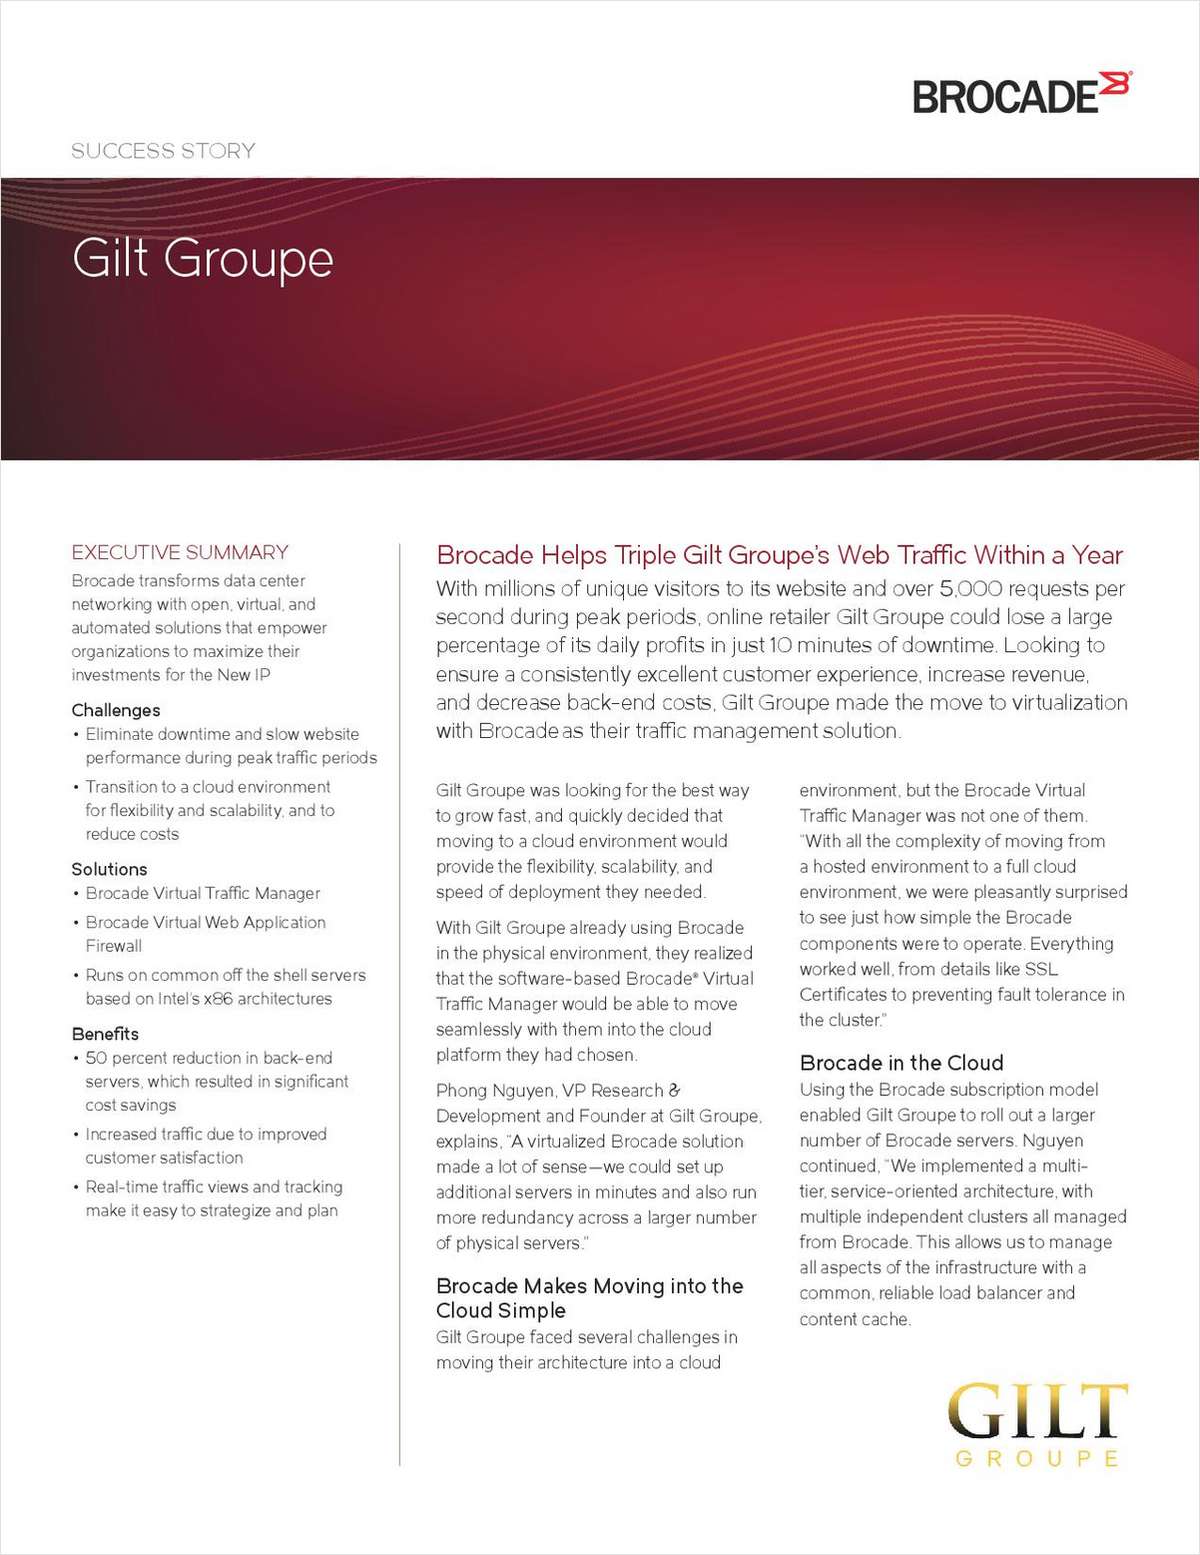 Brocade Helps Triple Gilt Groupe's Web Traffic Within a Year